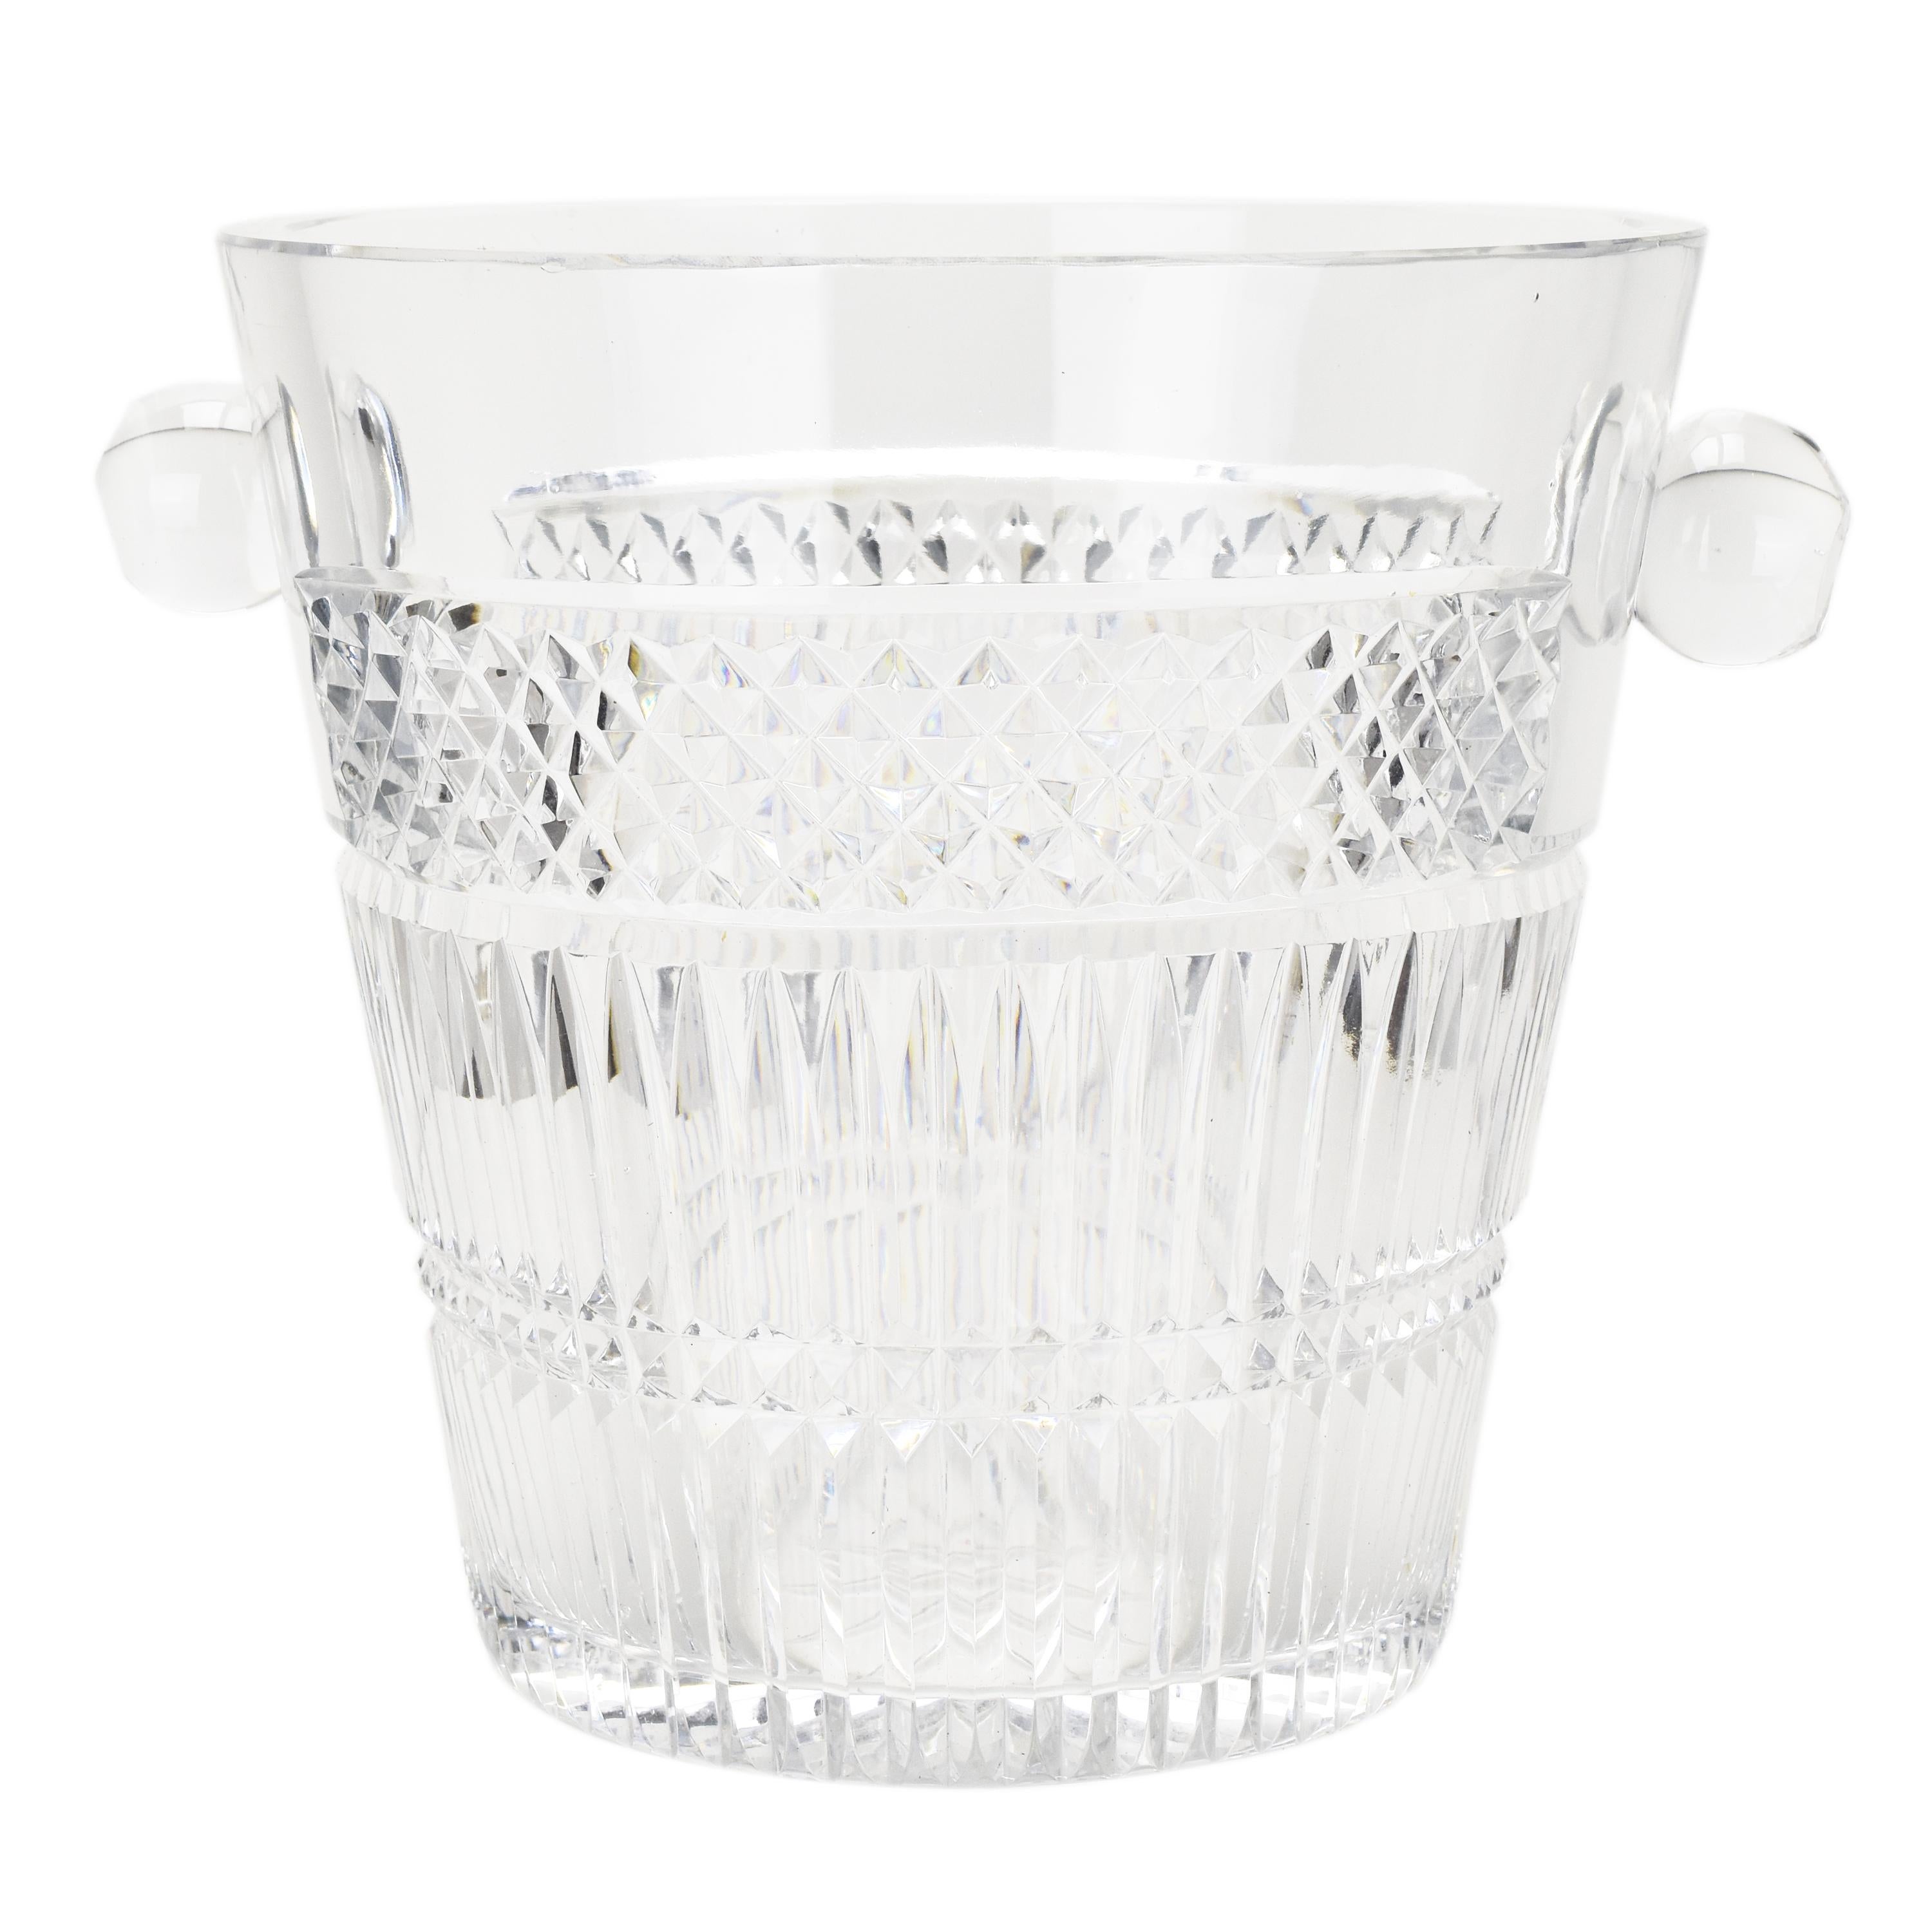 A large and heavy clear Art Deco cut full lead crystal champagne bucket made in the 1930s, possibly by renowned French glassmaker Baccarat. This champaign cooler is a rea masterpiece of craftsmanship and has a beautiful clear design. 

The champagne